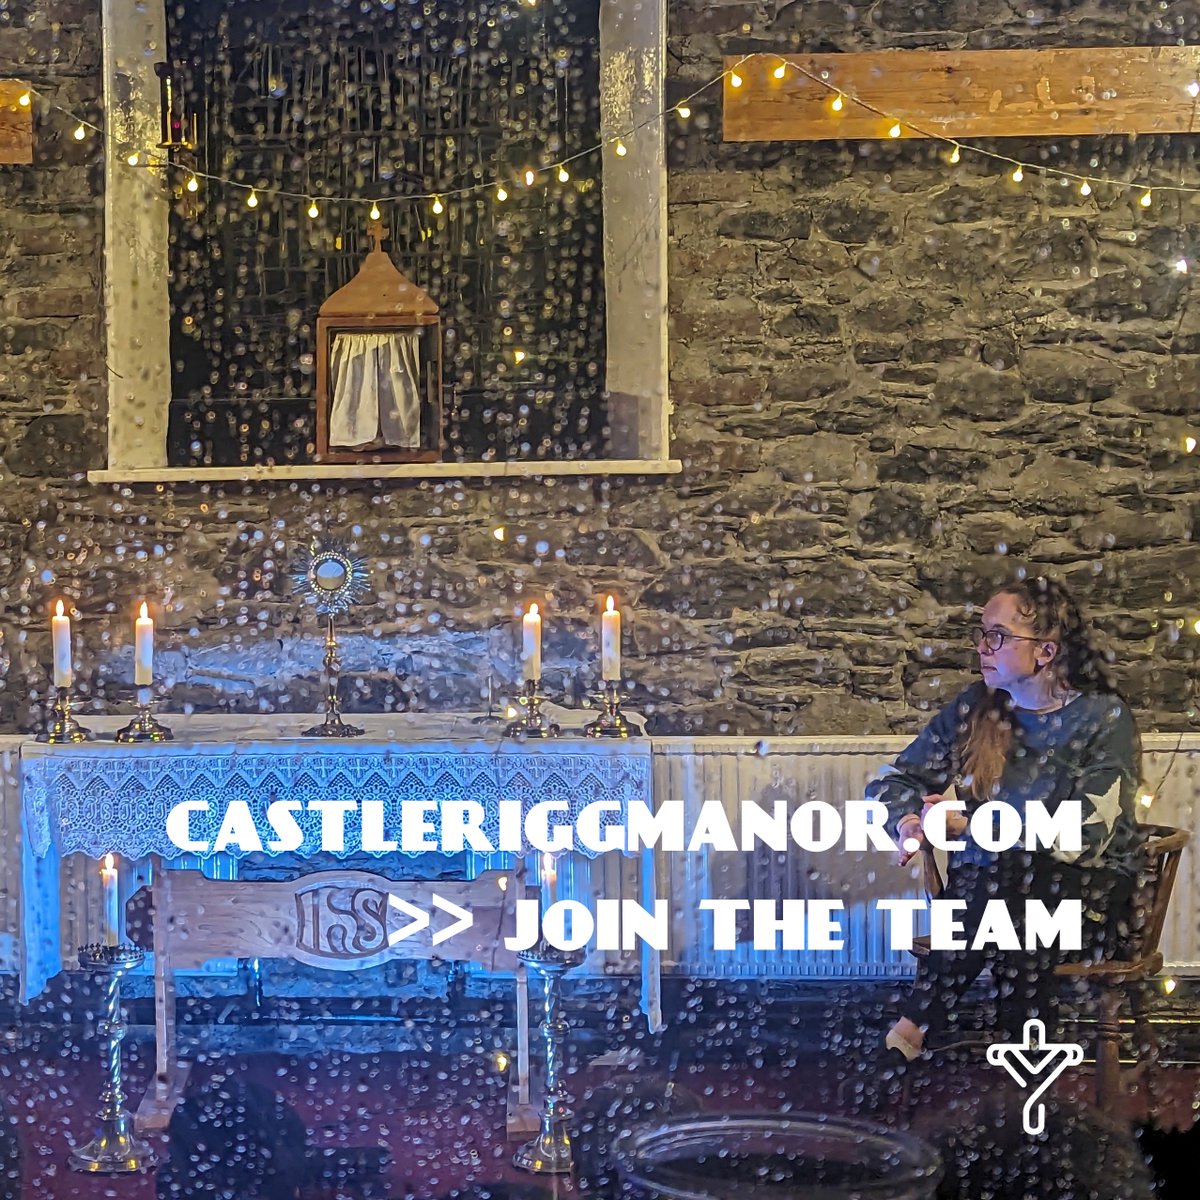 Are you aged 18-25 and looking for an exciting year..? If so, we are looking for team members for this September! castleriggmanor.com/join-the-team/